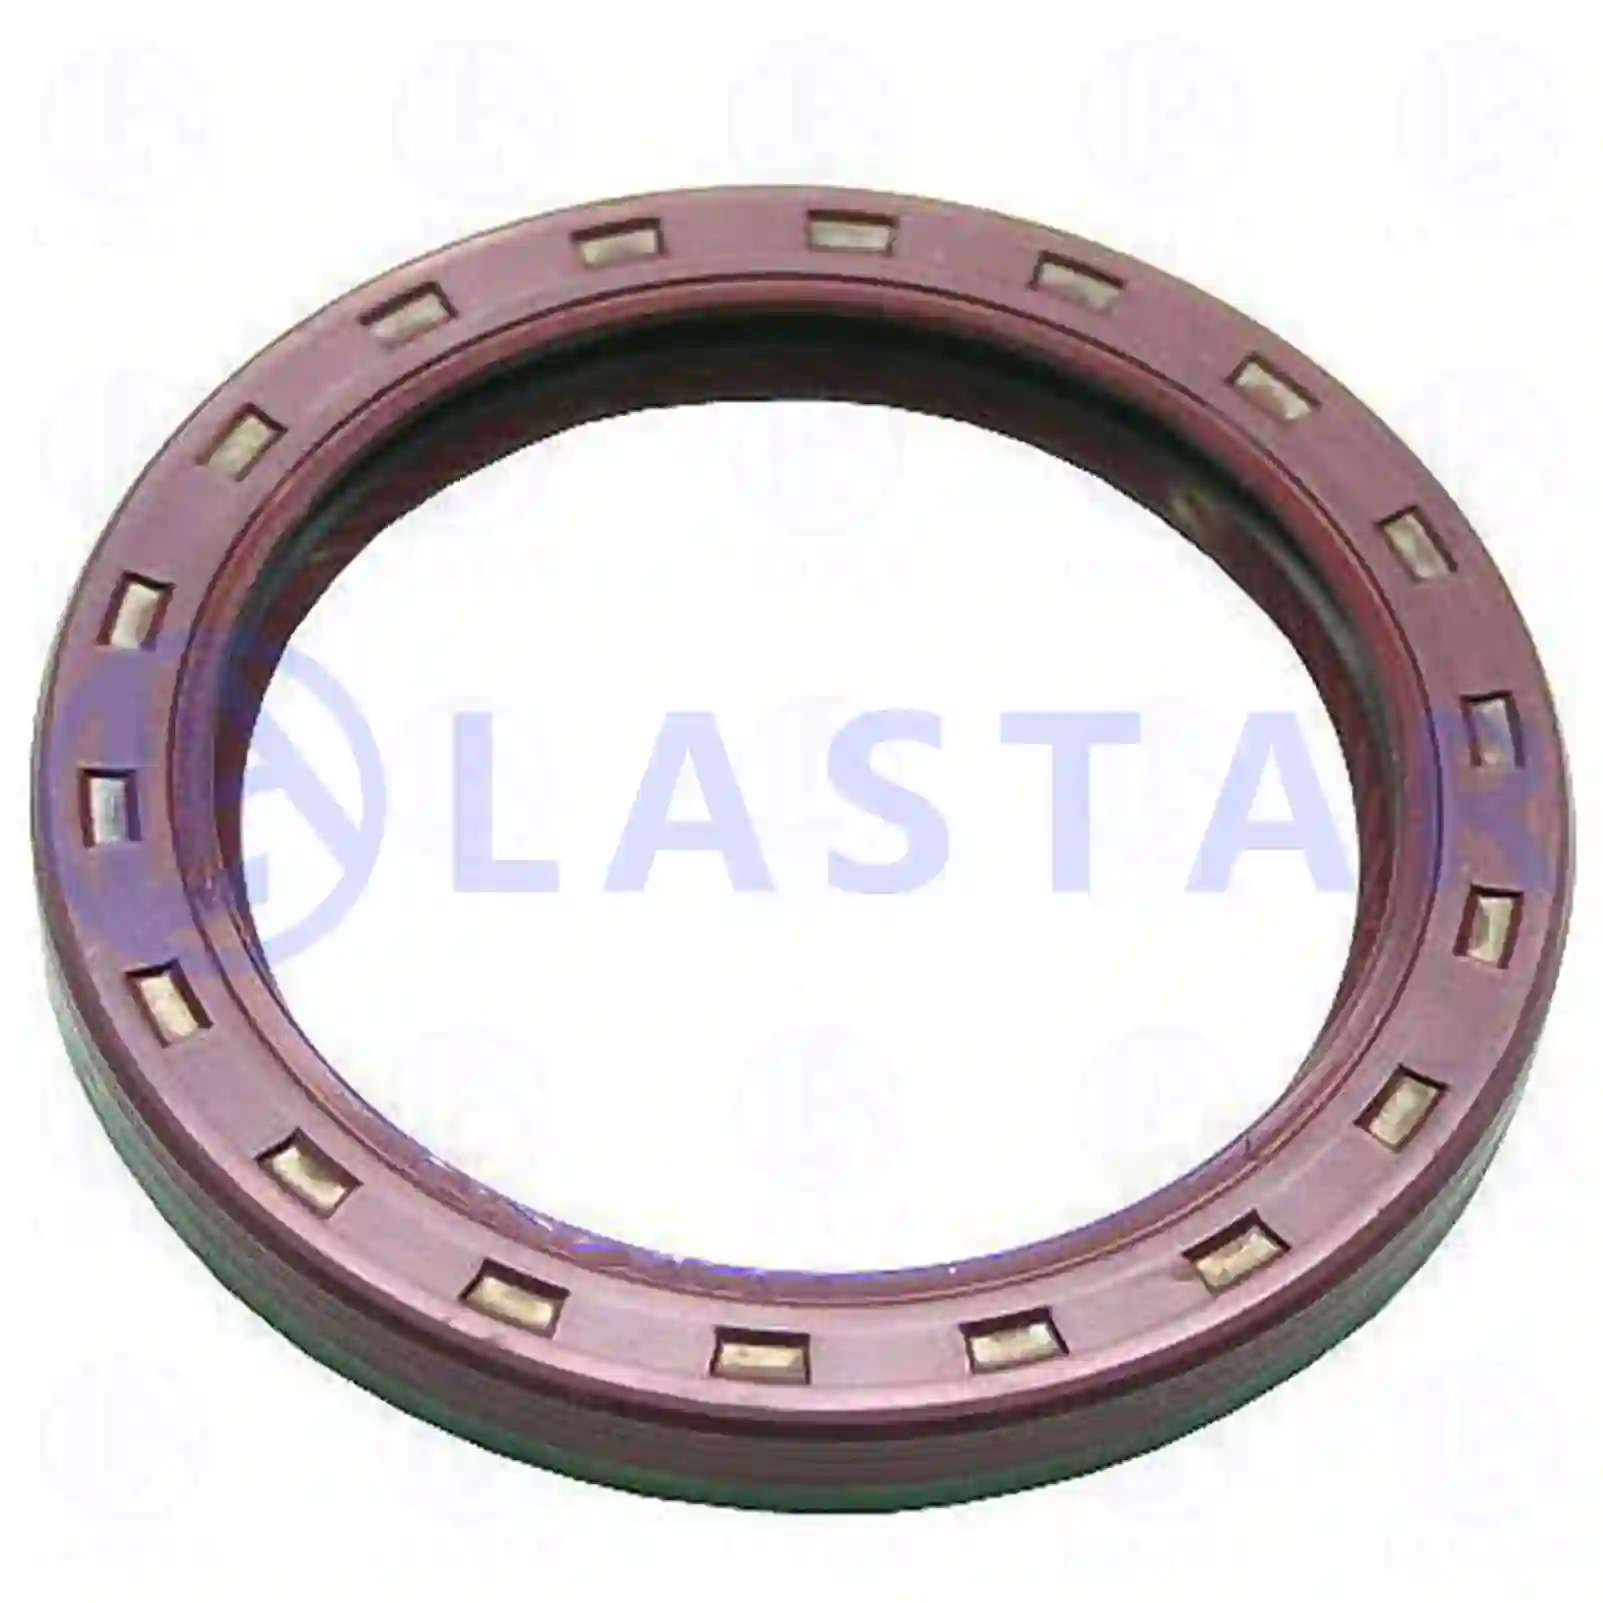 Oil seal, 77731963, 1296692, 42484086, 81965020403, 0119976247, 0159970647, 0159971647, 0219973047, 0249972147, 5000821194, 1266605, 1276424, 1276425, 430132 ||  77731963 Lastar Spare Part | Truck Spare Parts, Auotomotive Spare Parts Oil seal, 77731963, 1296692, 42484086, 81965020403, 0119976247, 0159970647, 0159971647, 0219973047, 0249972147, 5000821194, 1266605, 1276424, 1276425, 430132 ||  77731963 Lastar Spare Part | Truck Spare Parts, Auotomotive Spare Parts